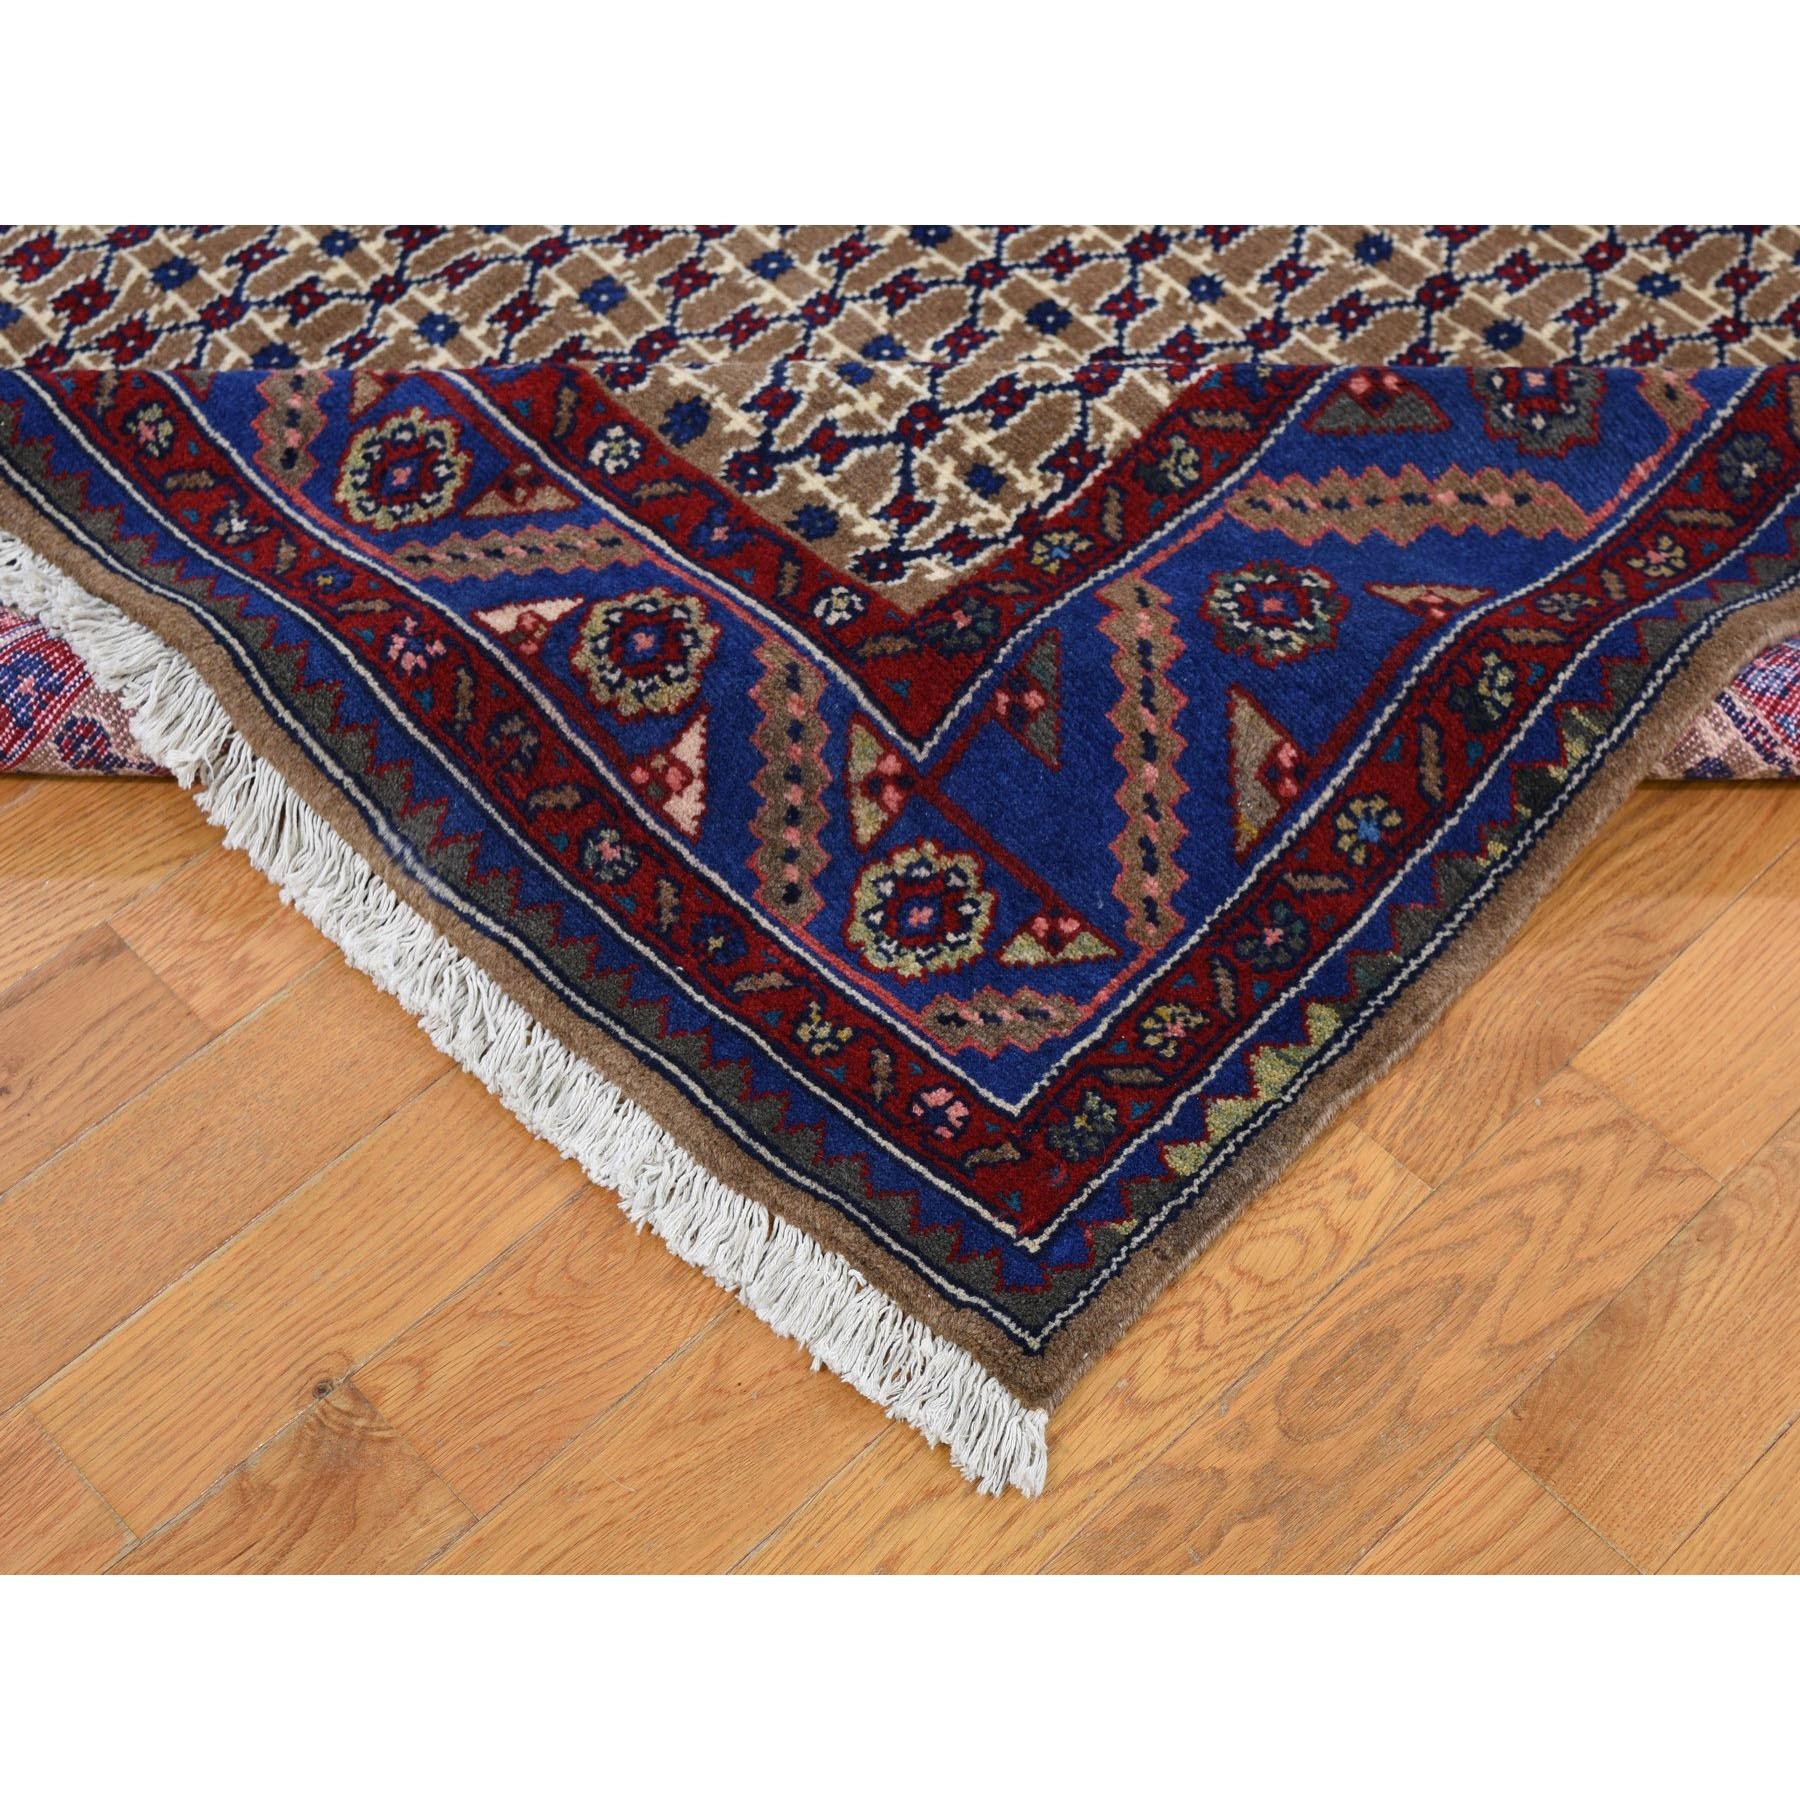 Brown Persian Hamadan Pure Wool Camel Hair Hand Knotted Oriental Rug 13